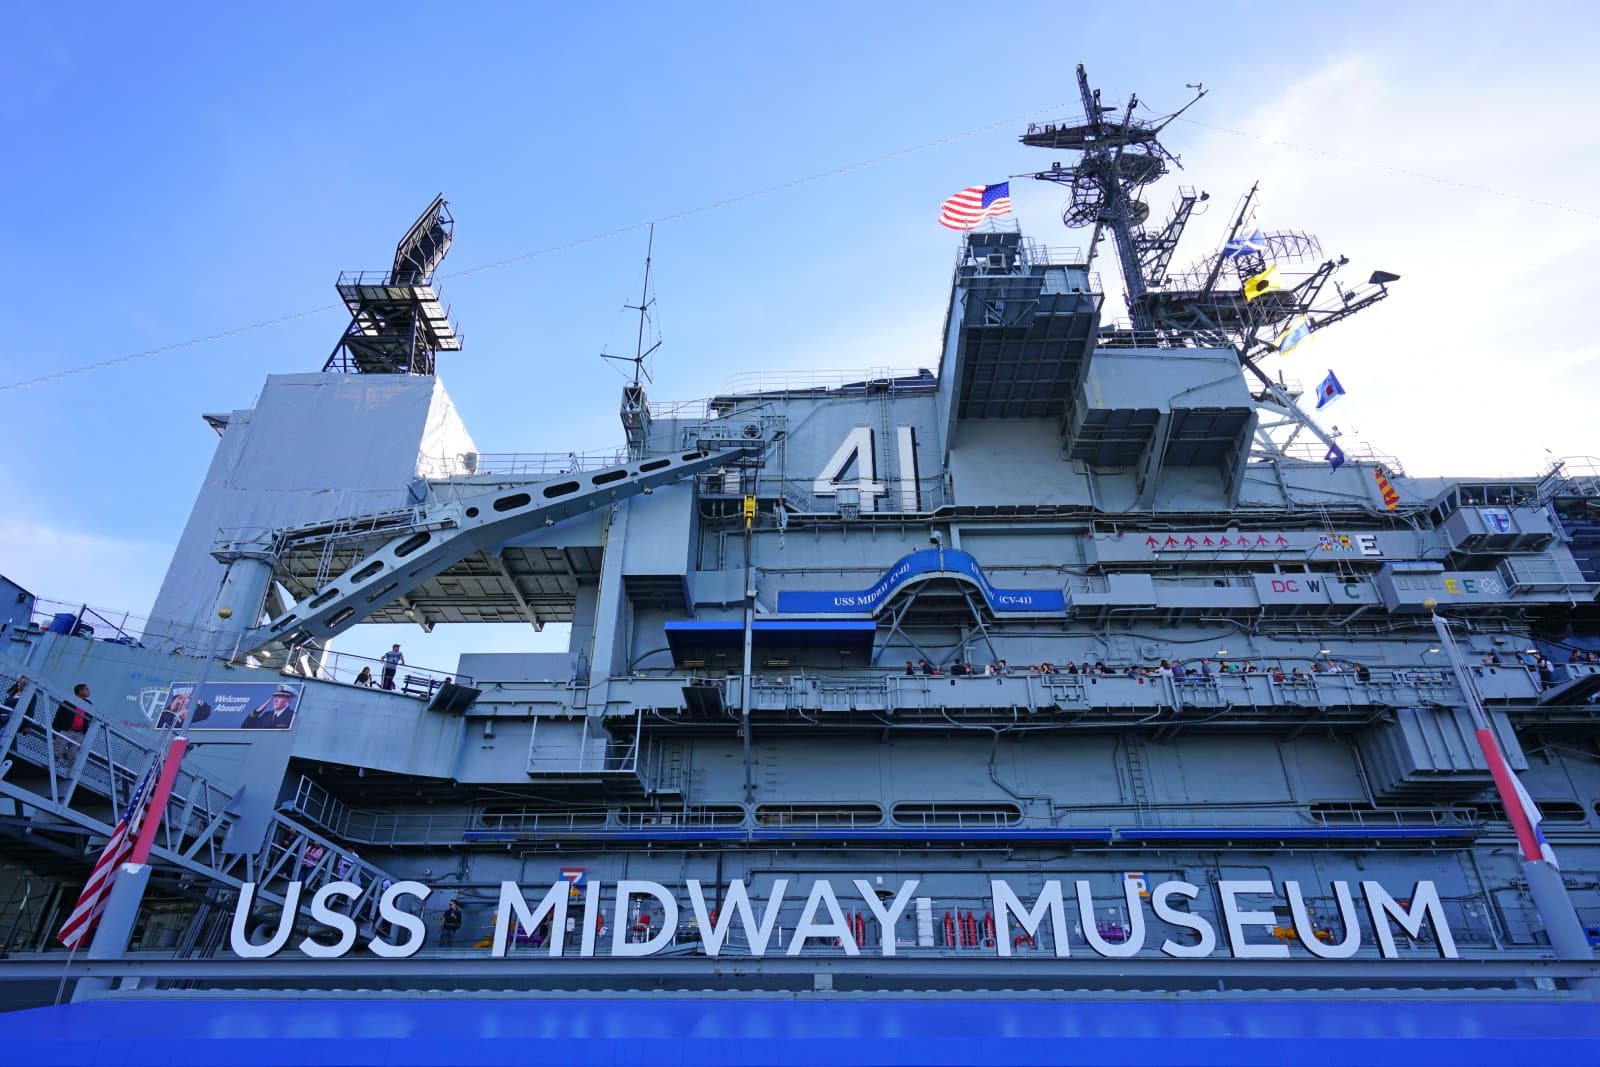 <p class="wp-caption-text">Image Credit: Shutterstock / EQRoy</p>  <p>Located in San Diego, the museum aboard the aircraft carrier USS Midway provides insights into naval operations during the Cold War and other post-WWII conflicts.</p>